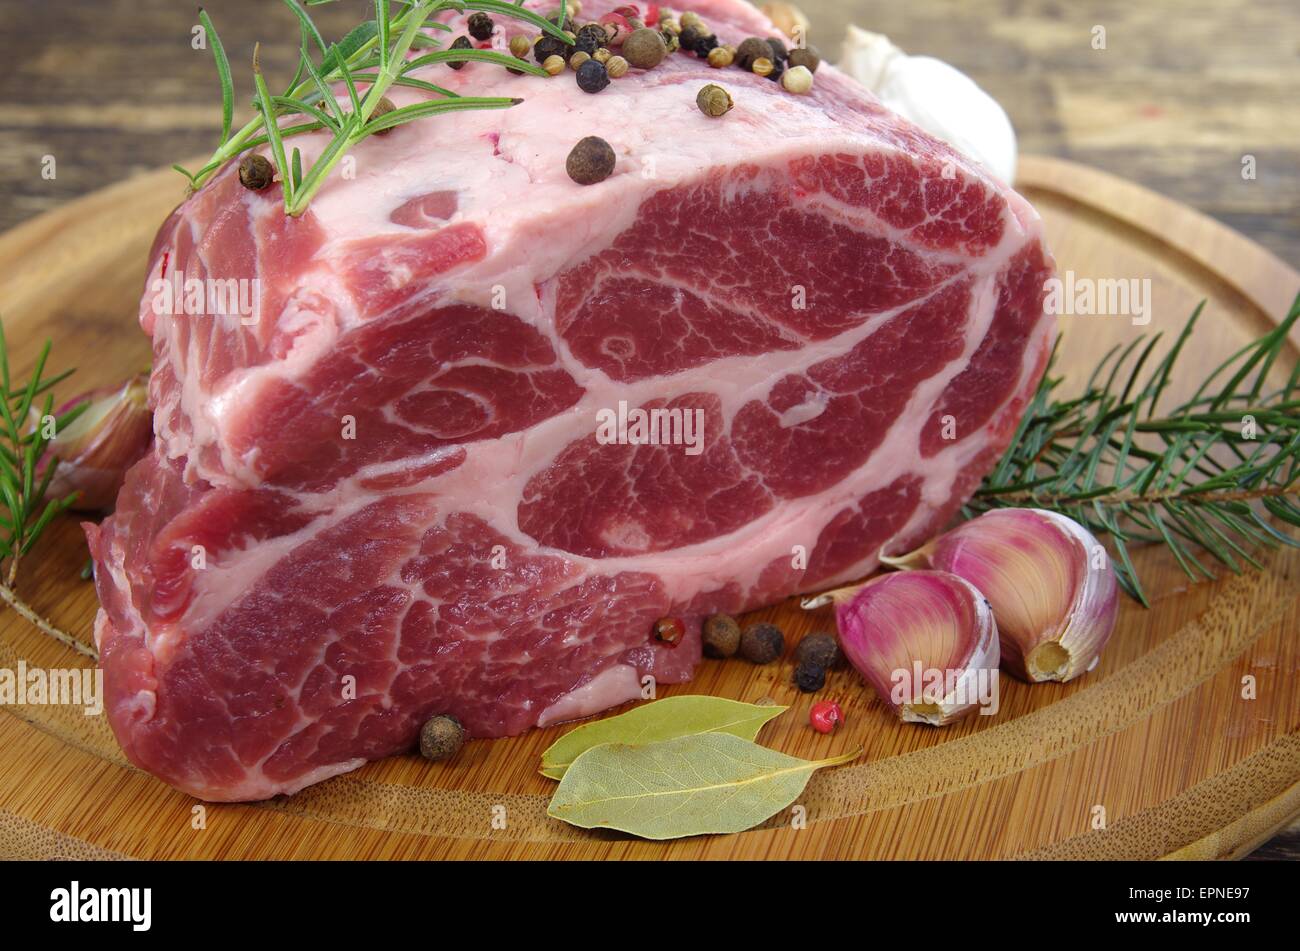 neck with rosemary and basil on chopping board Stock Photo